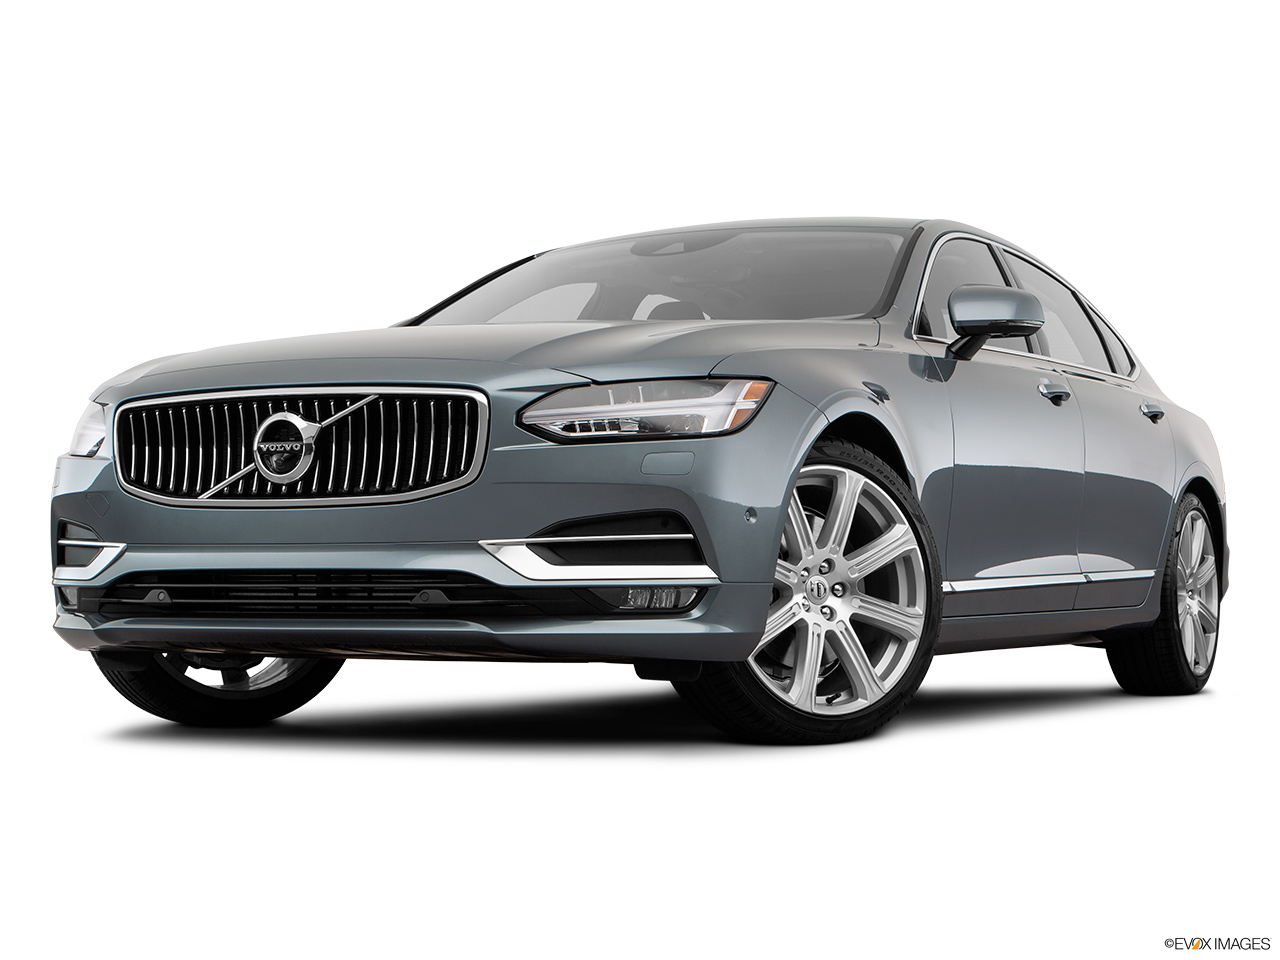 2020 Volvo S90 T6 Inscription Front angle view, low wide perspective. 